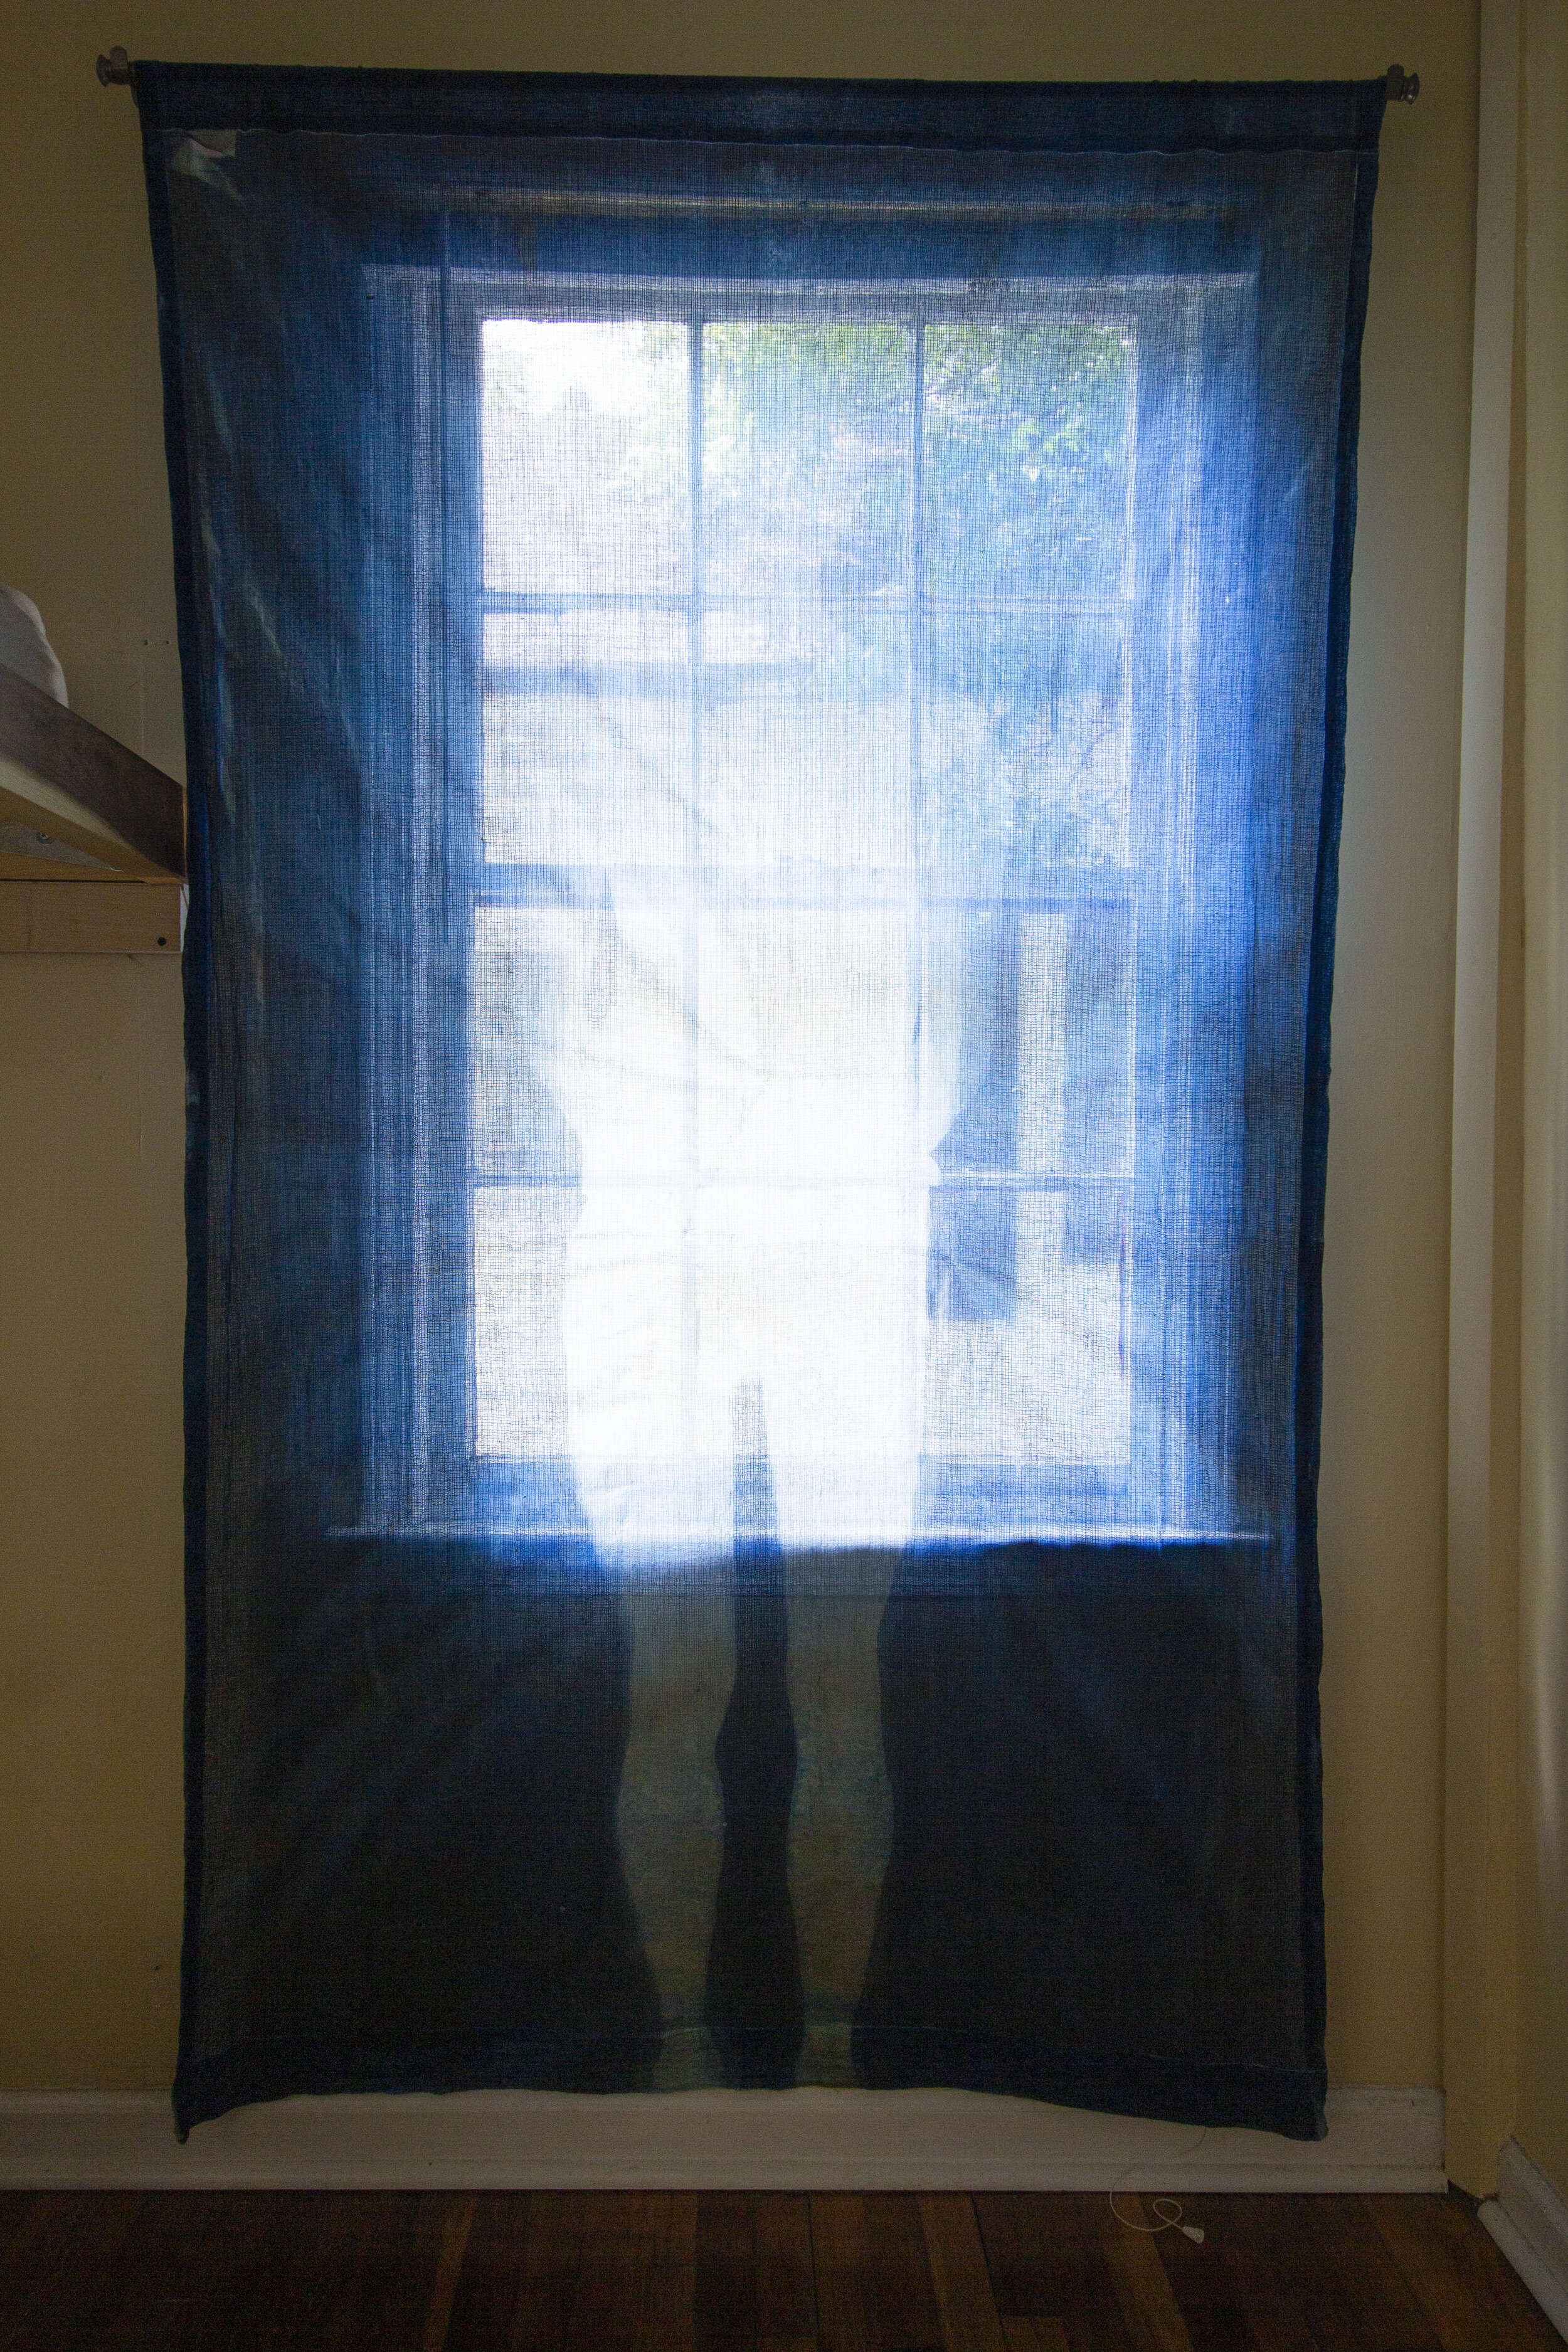 Fading [midday], 2020, cotton curtain, cyanotype solution, curtain rod, and hardware, 55 x 84 inches.